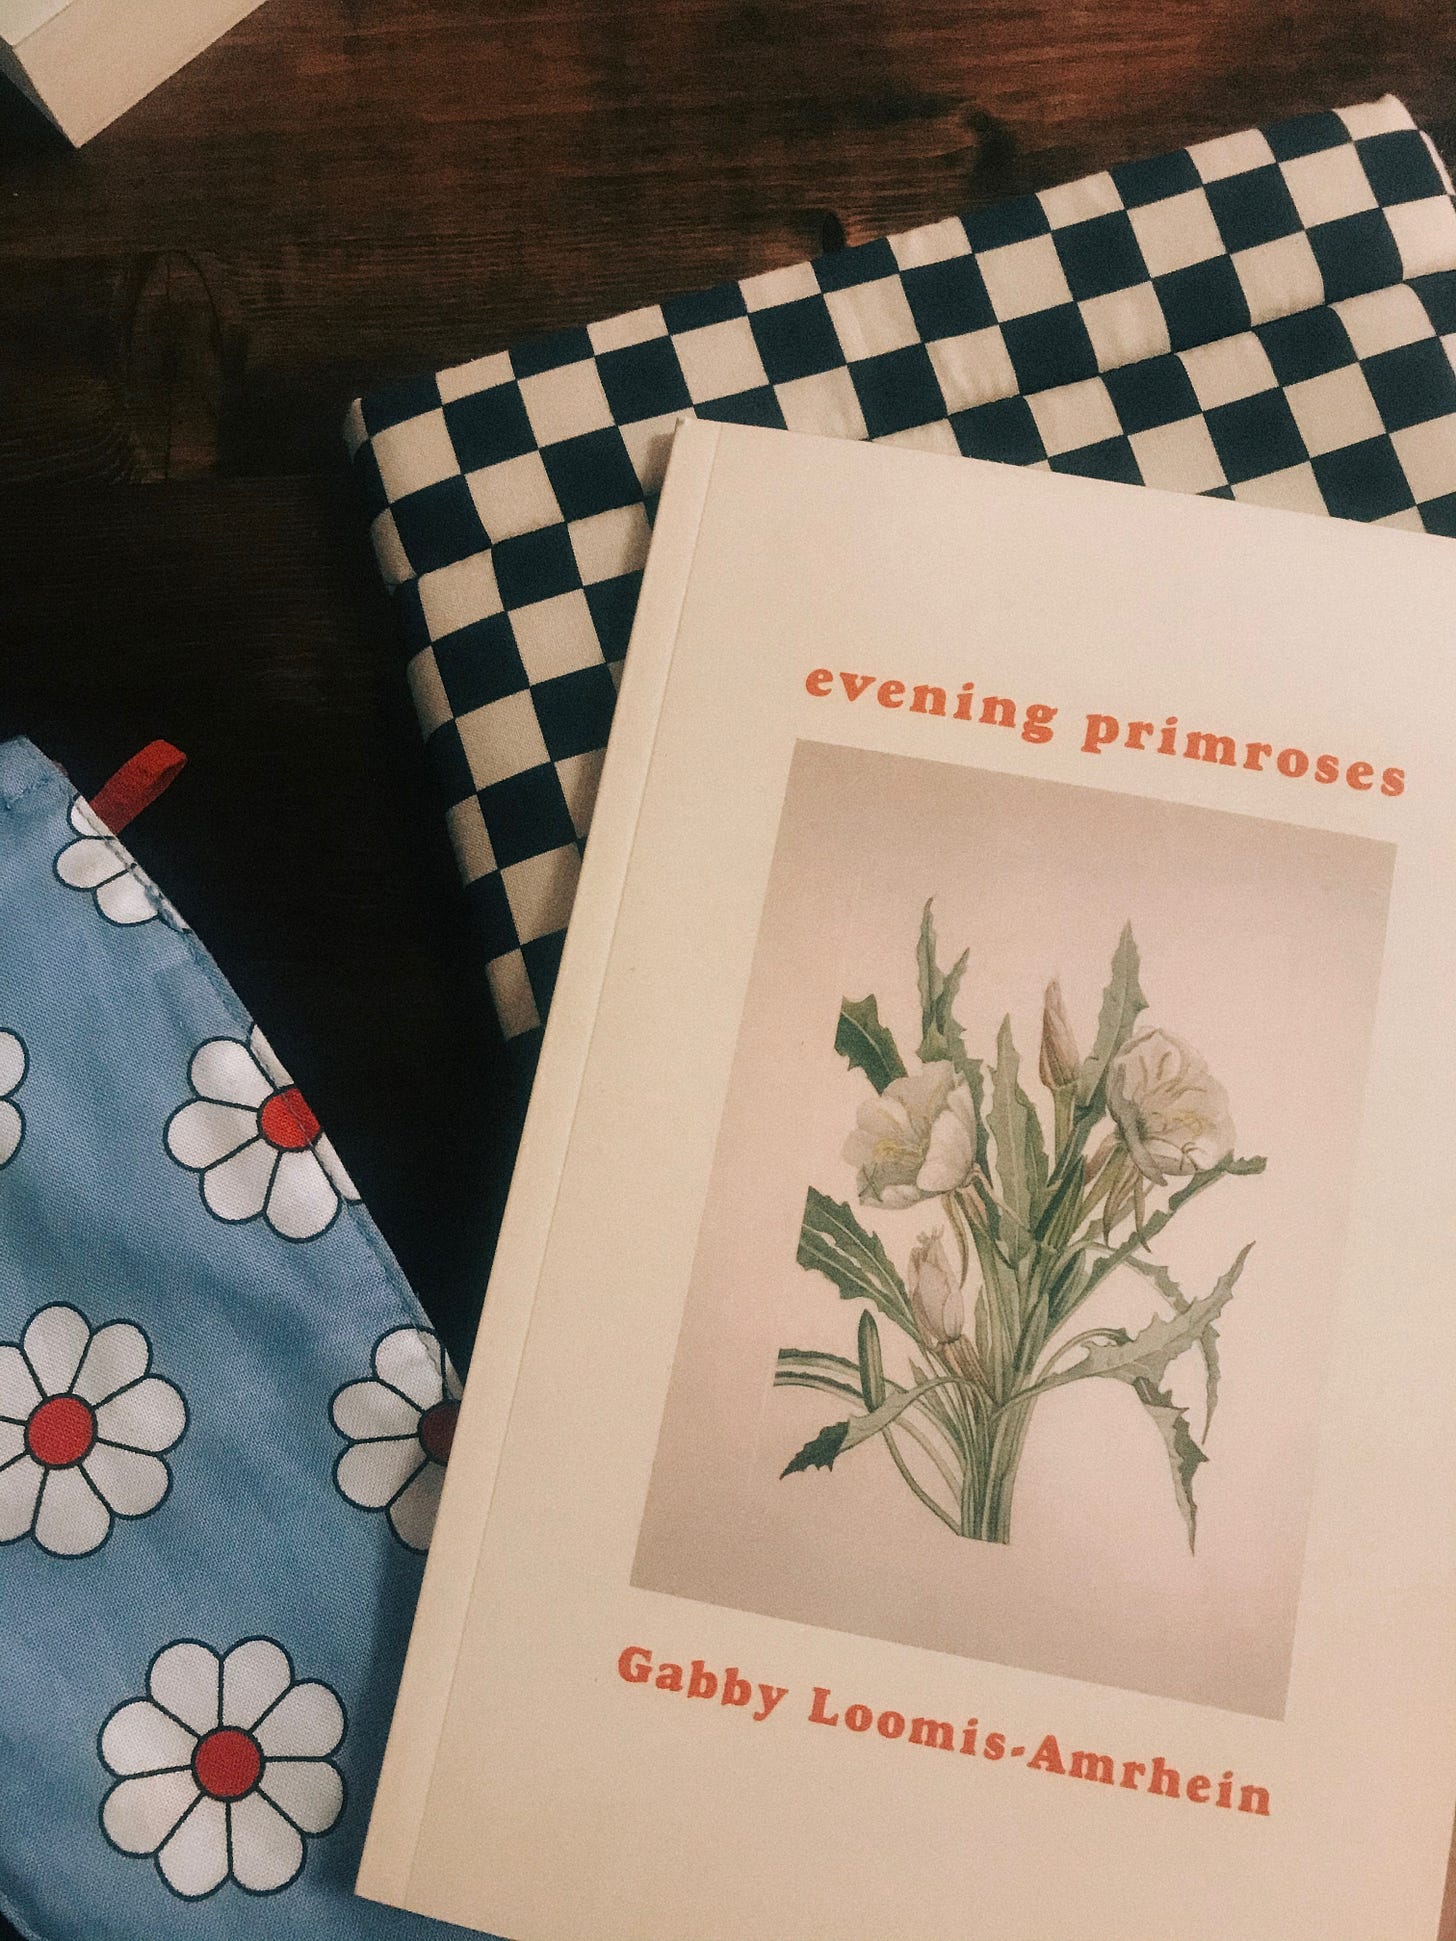 evening primroses sits on top of a black & white checkered book sleeve. Next to the sleeve is a blue face mask with white flowers.